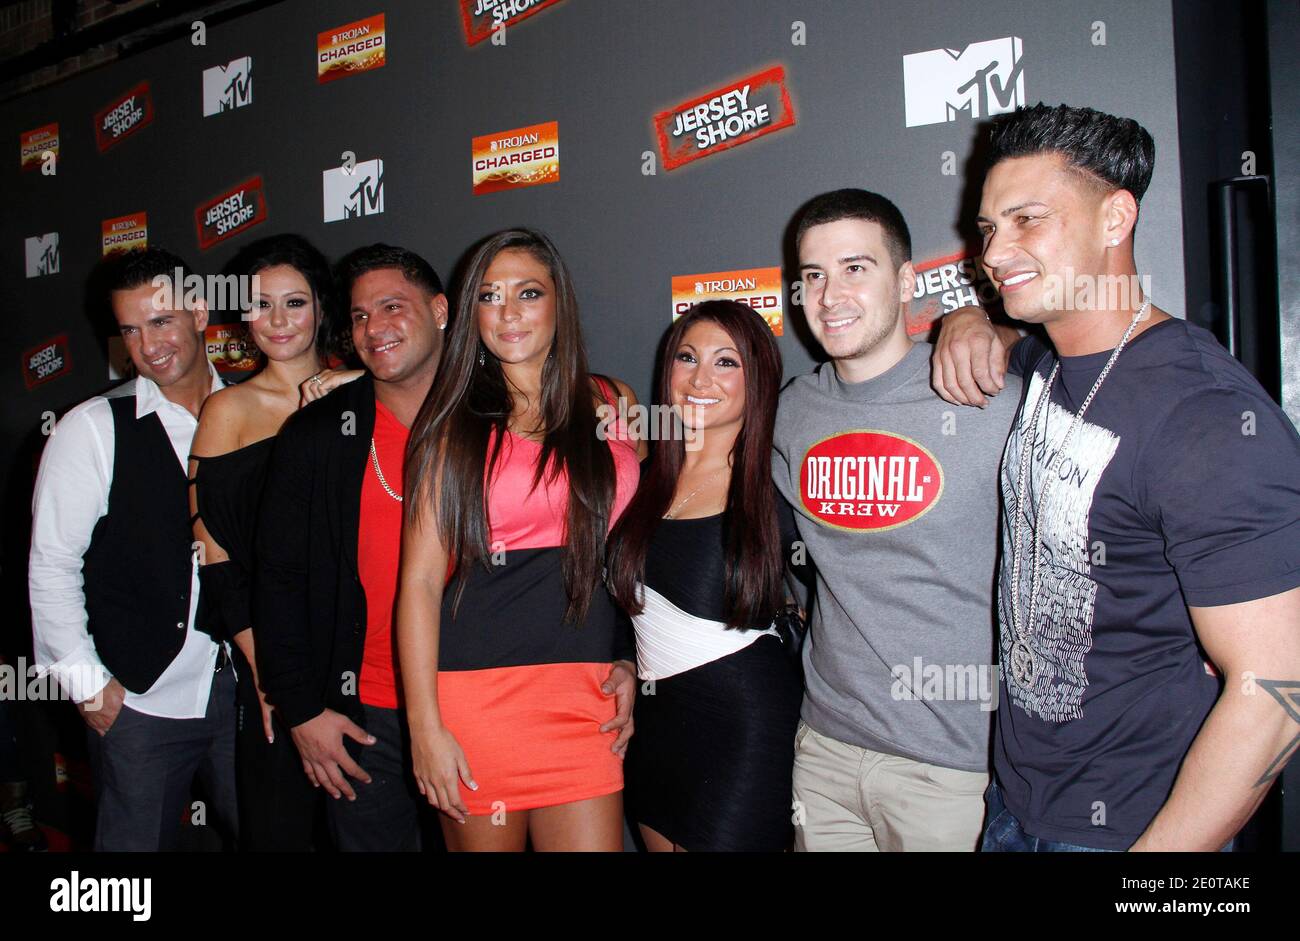 Mike Sorrentino, Jenni Farley, Ronnie Ortiz-Magro, Sammi Giancola, Deena Cortese, Vinny Guadagnino and Pauly D attend the Jersey Shore final season premiere event at Bagatelle in New York City, NY, USA, on October 04, 2012. Photo by Donna Ward/ABACAPRESS.COM Stock Photo